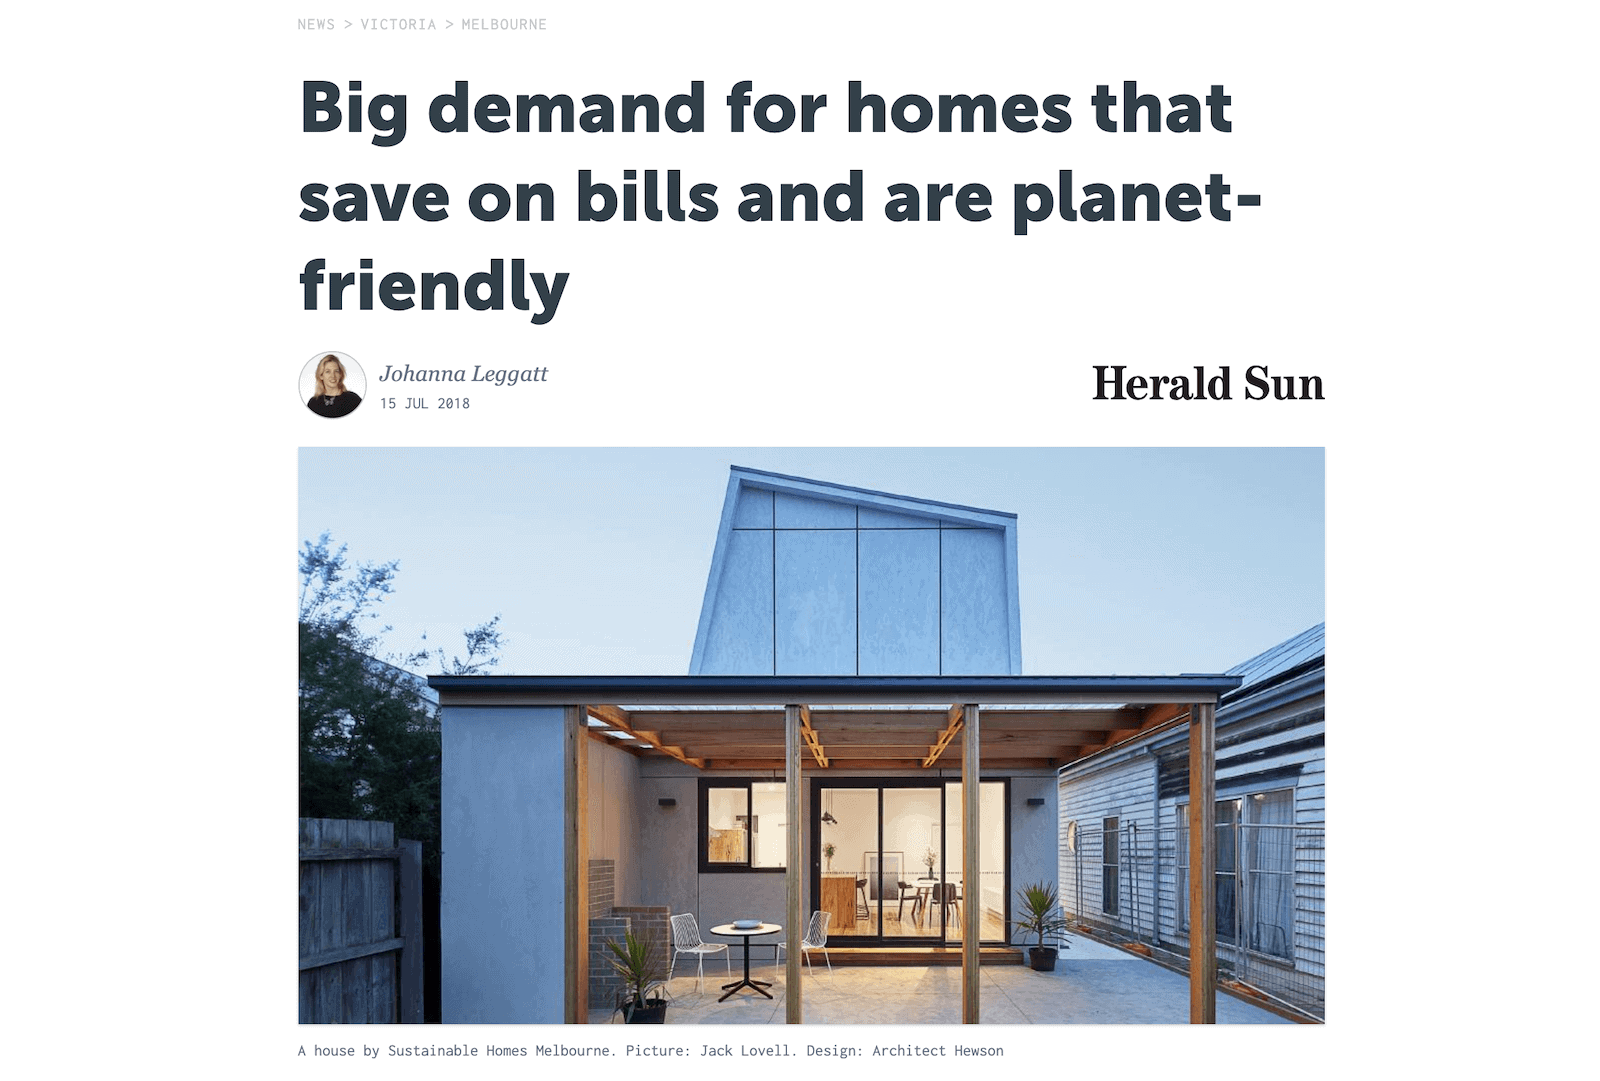 Demand for Melbourne homes built with sustainable design and green architecture